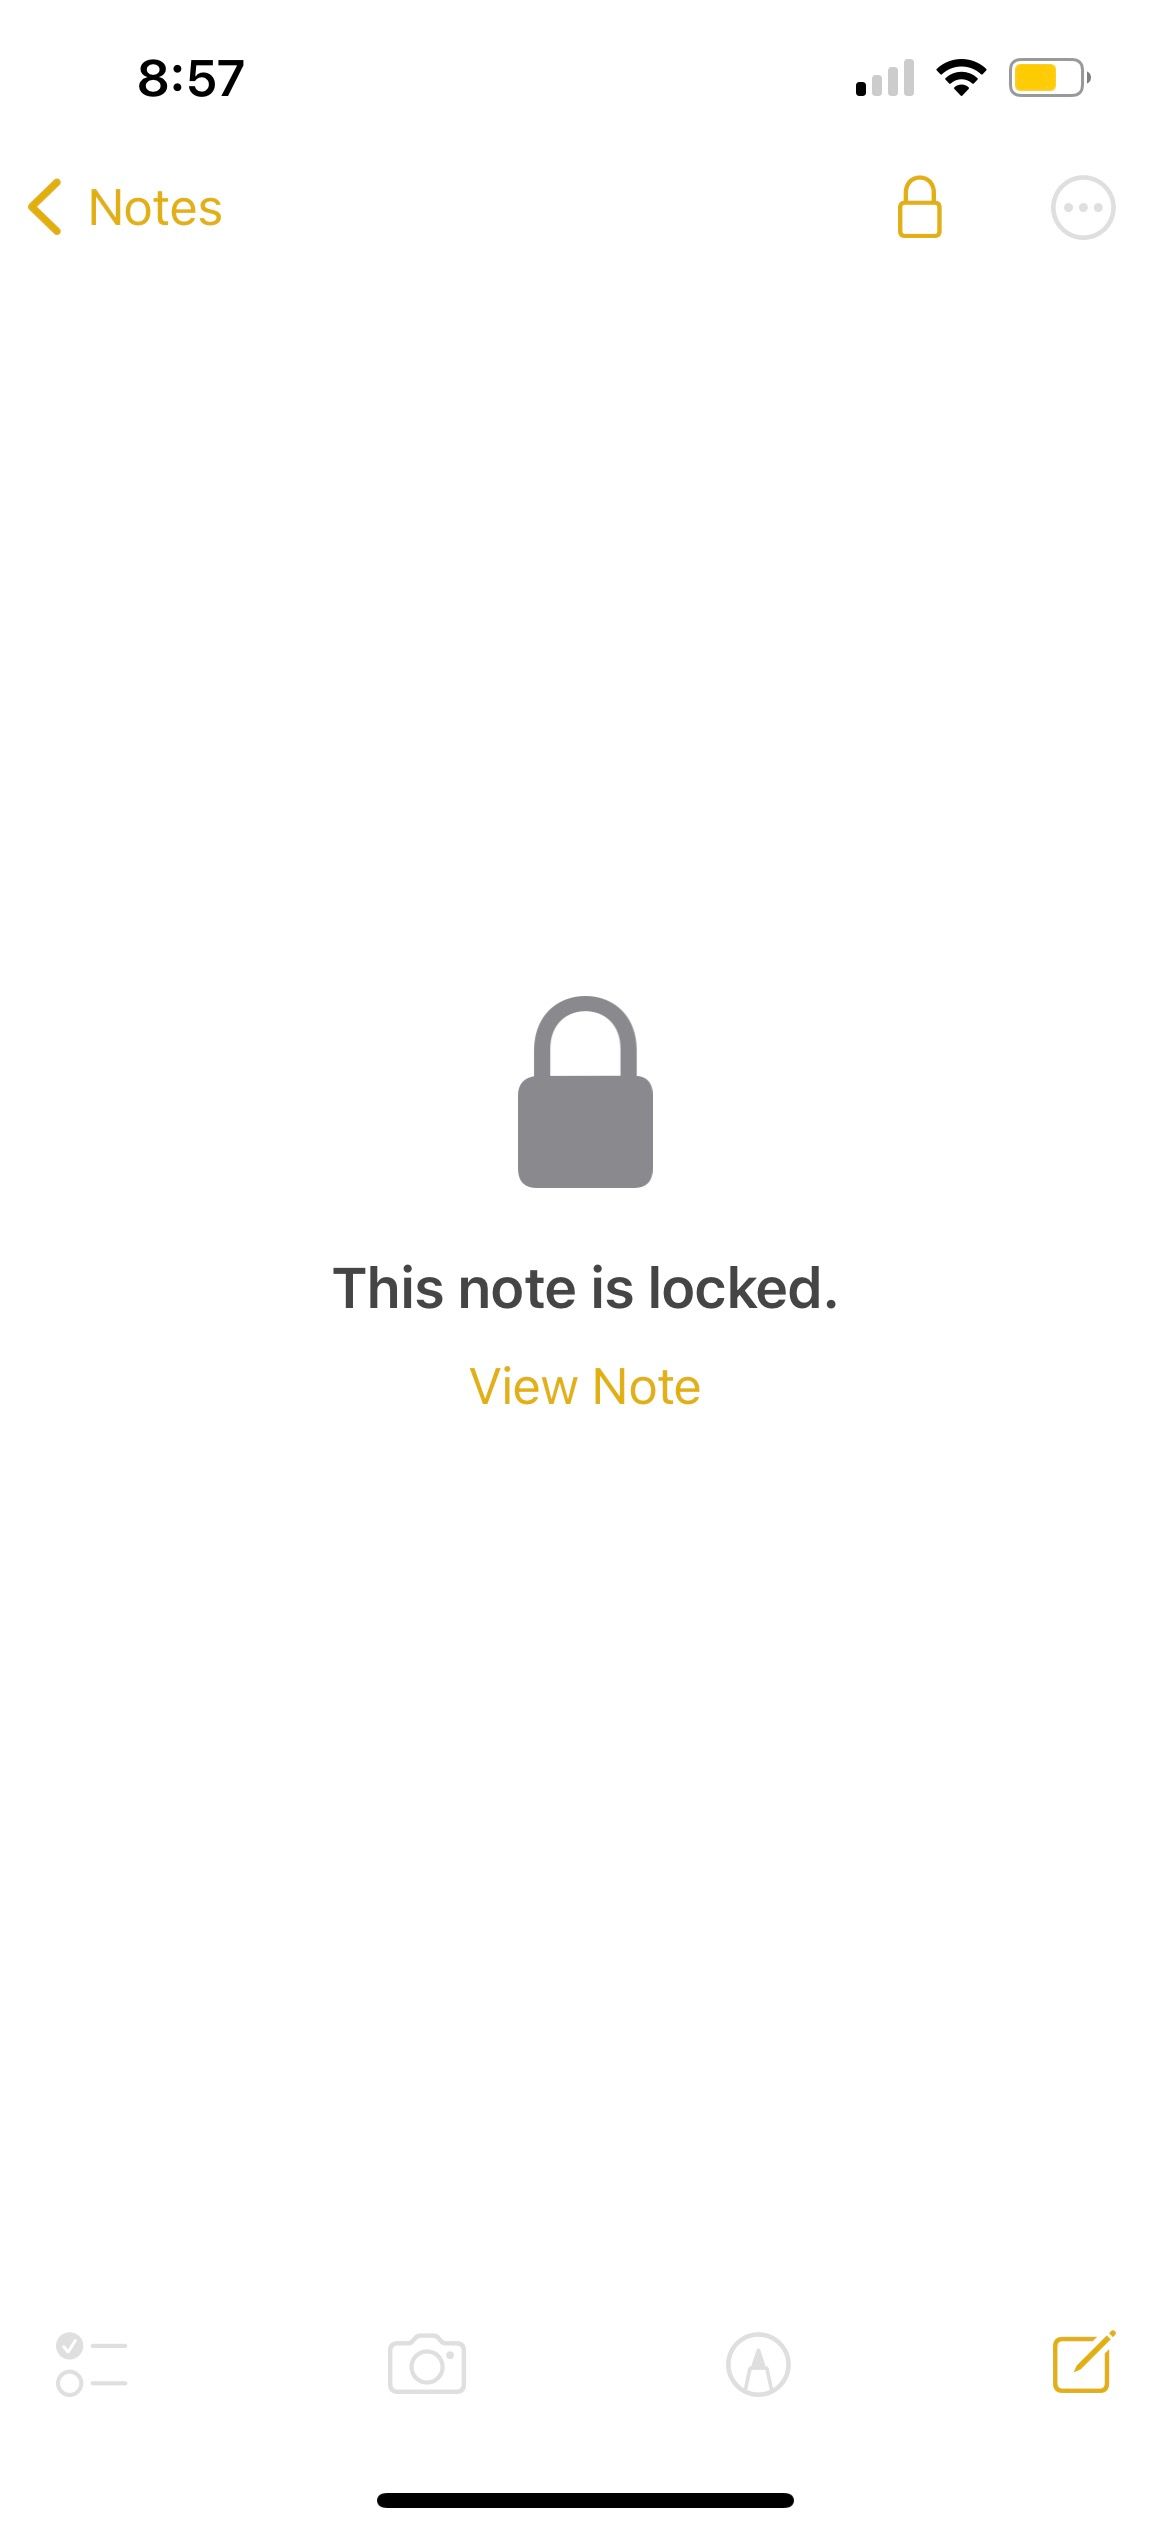 locked note on iphone showing this note is locked message